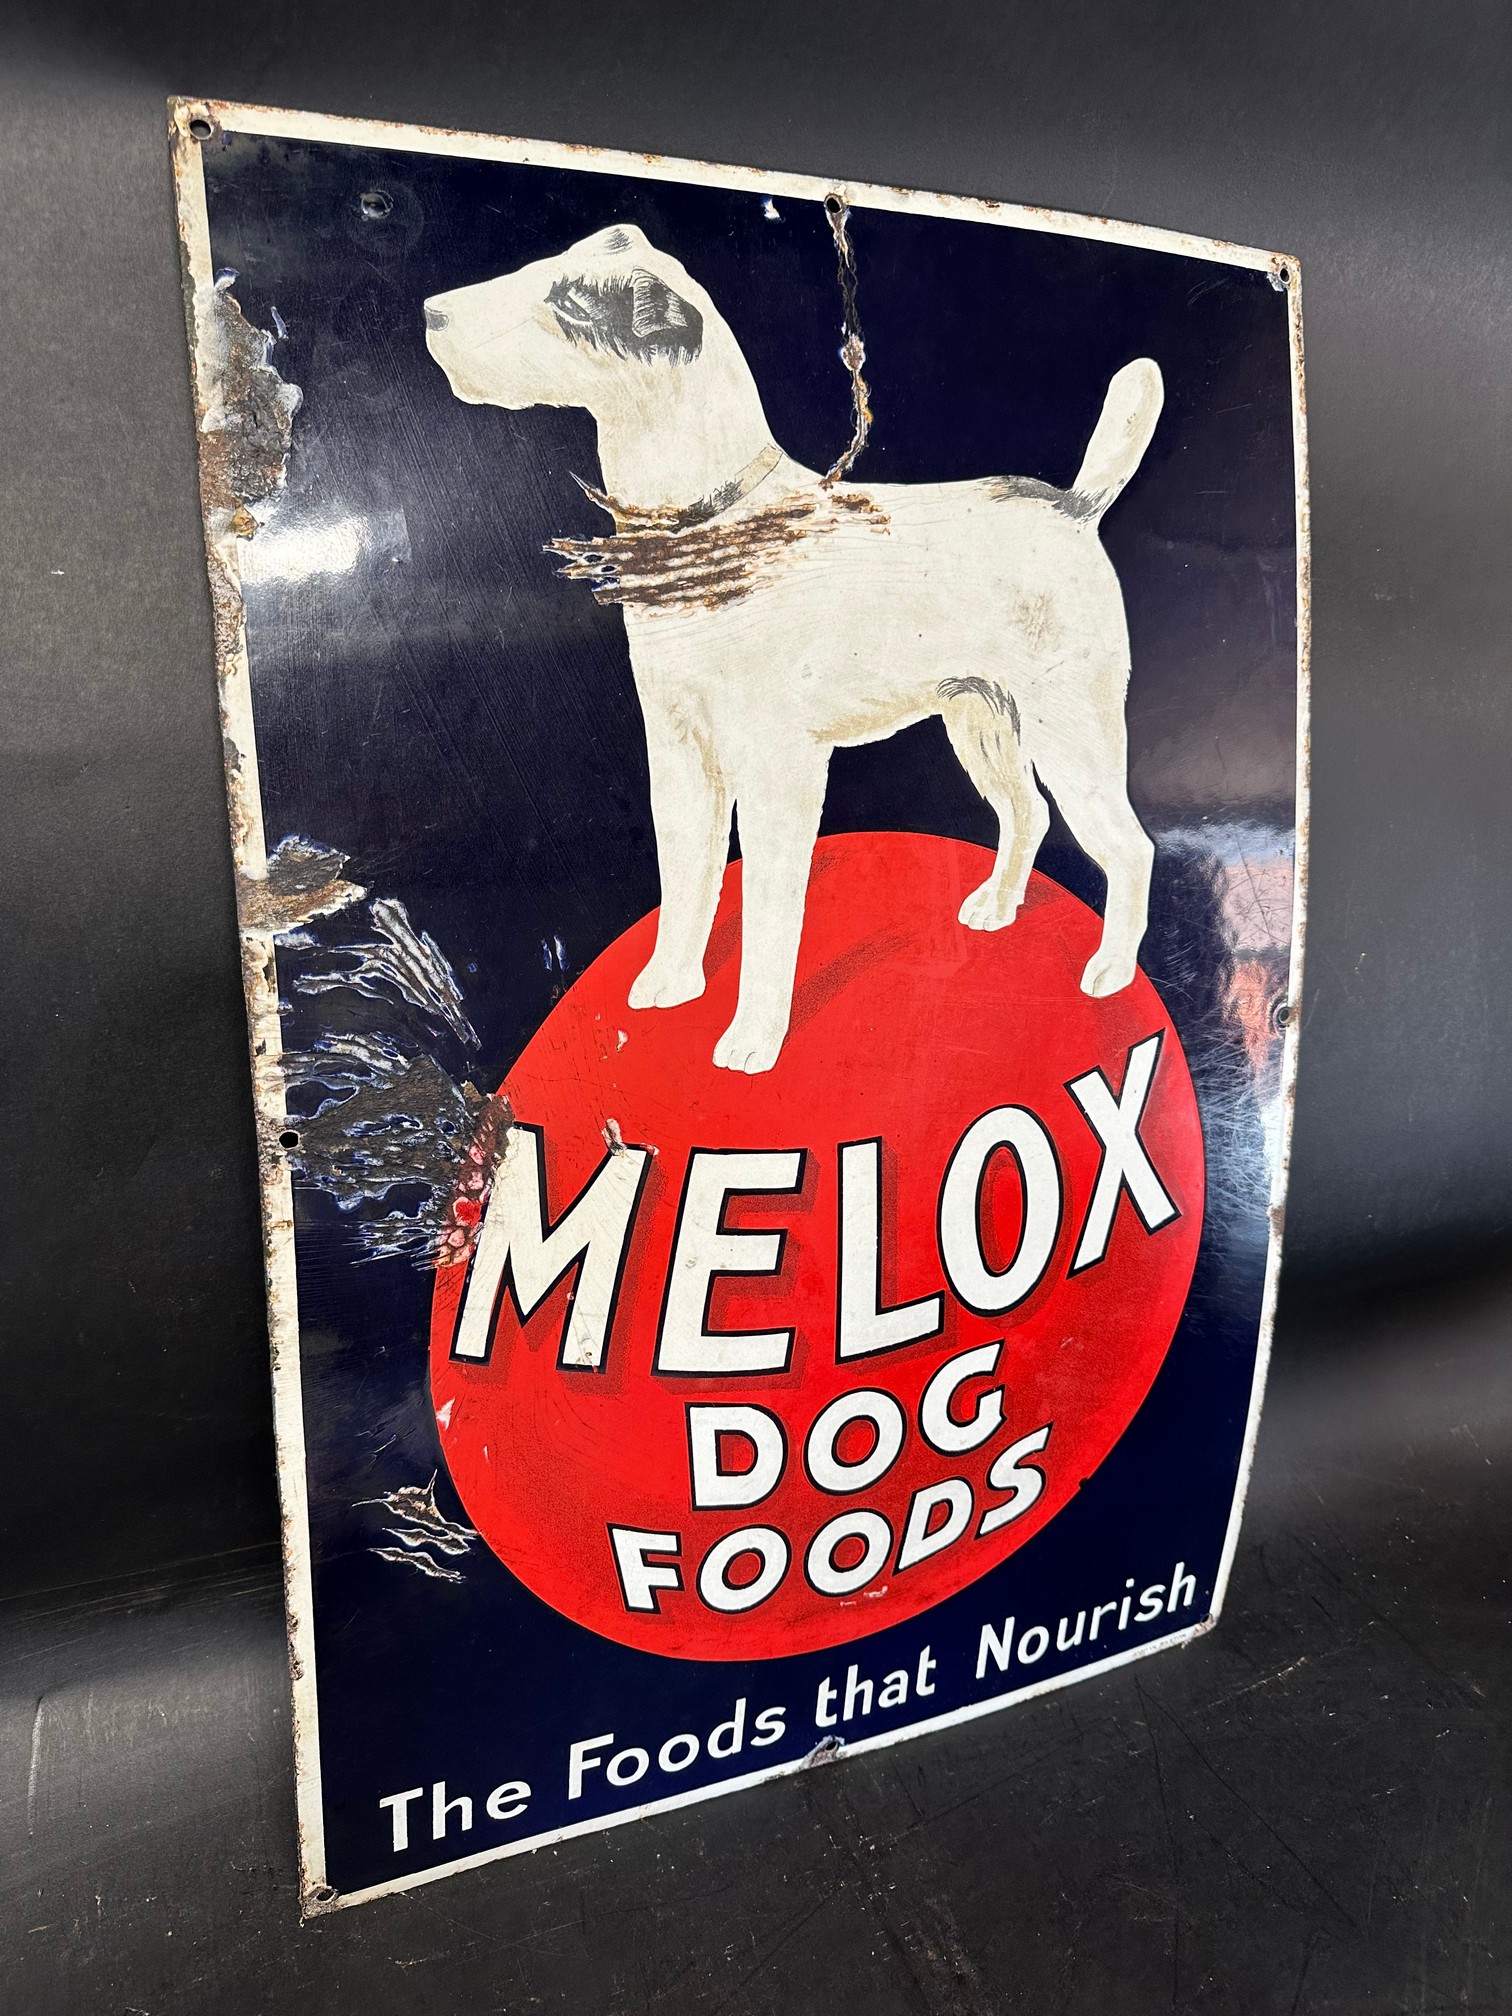 A Melox Dog Foods 'The Foods that Nourish' pictorial enamel advertising sign, 18 x 26".